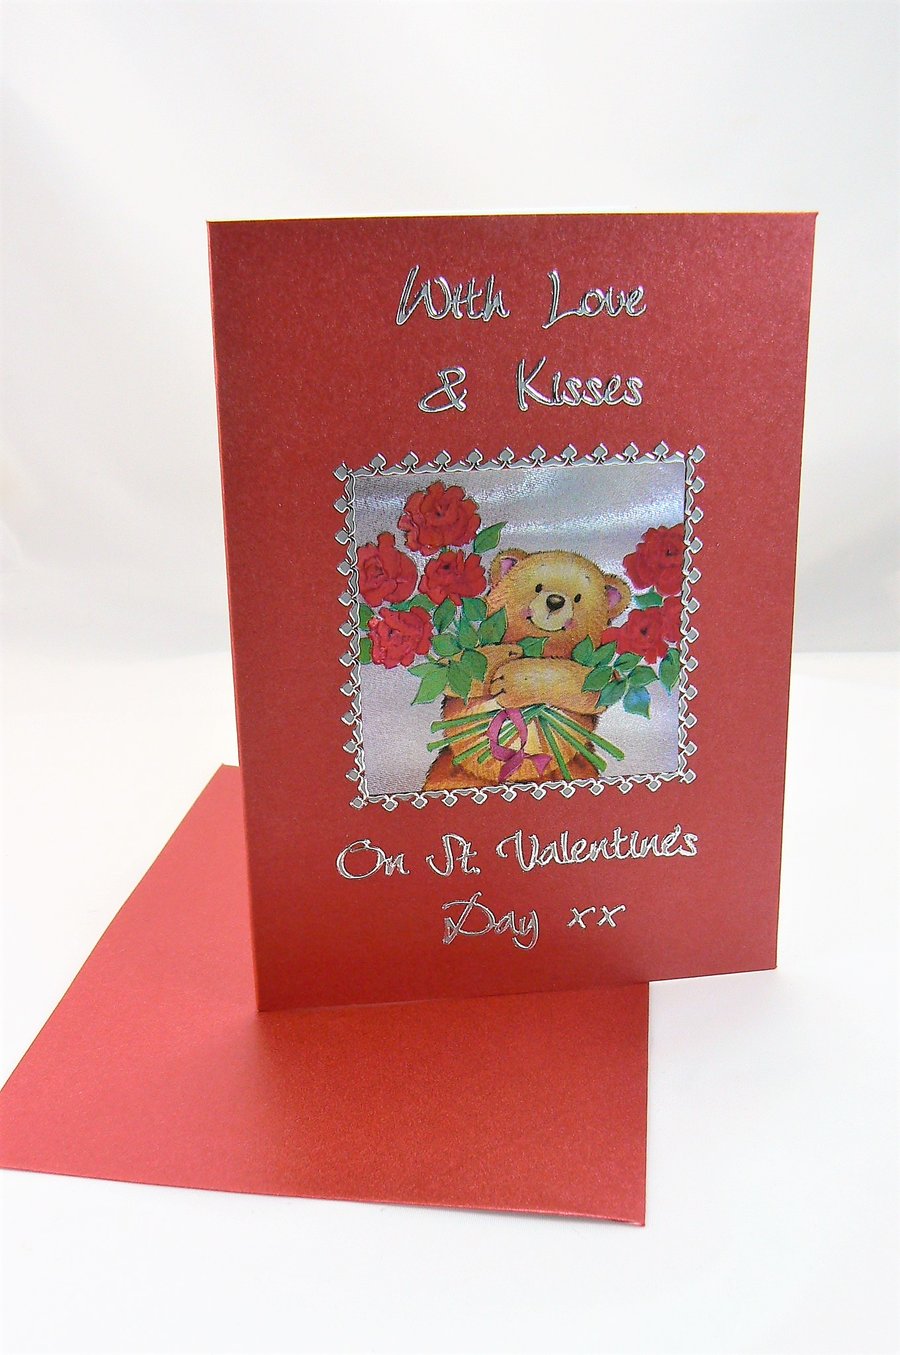 Valentine's card  (Bear & roses) With Love & Kisses on St Valentines Day xx